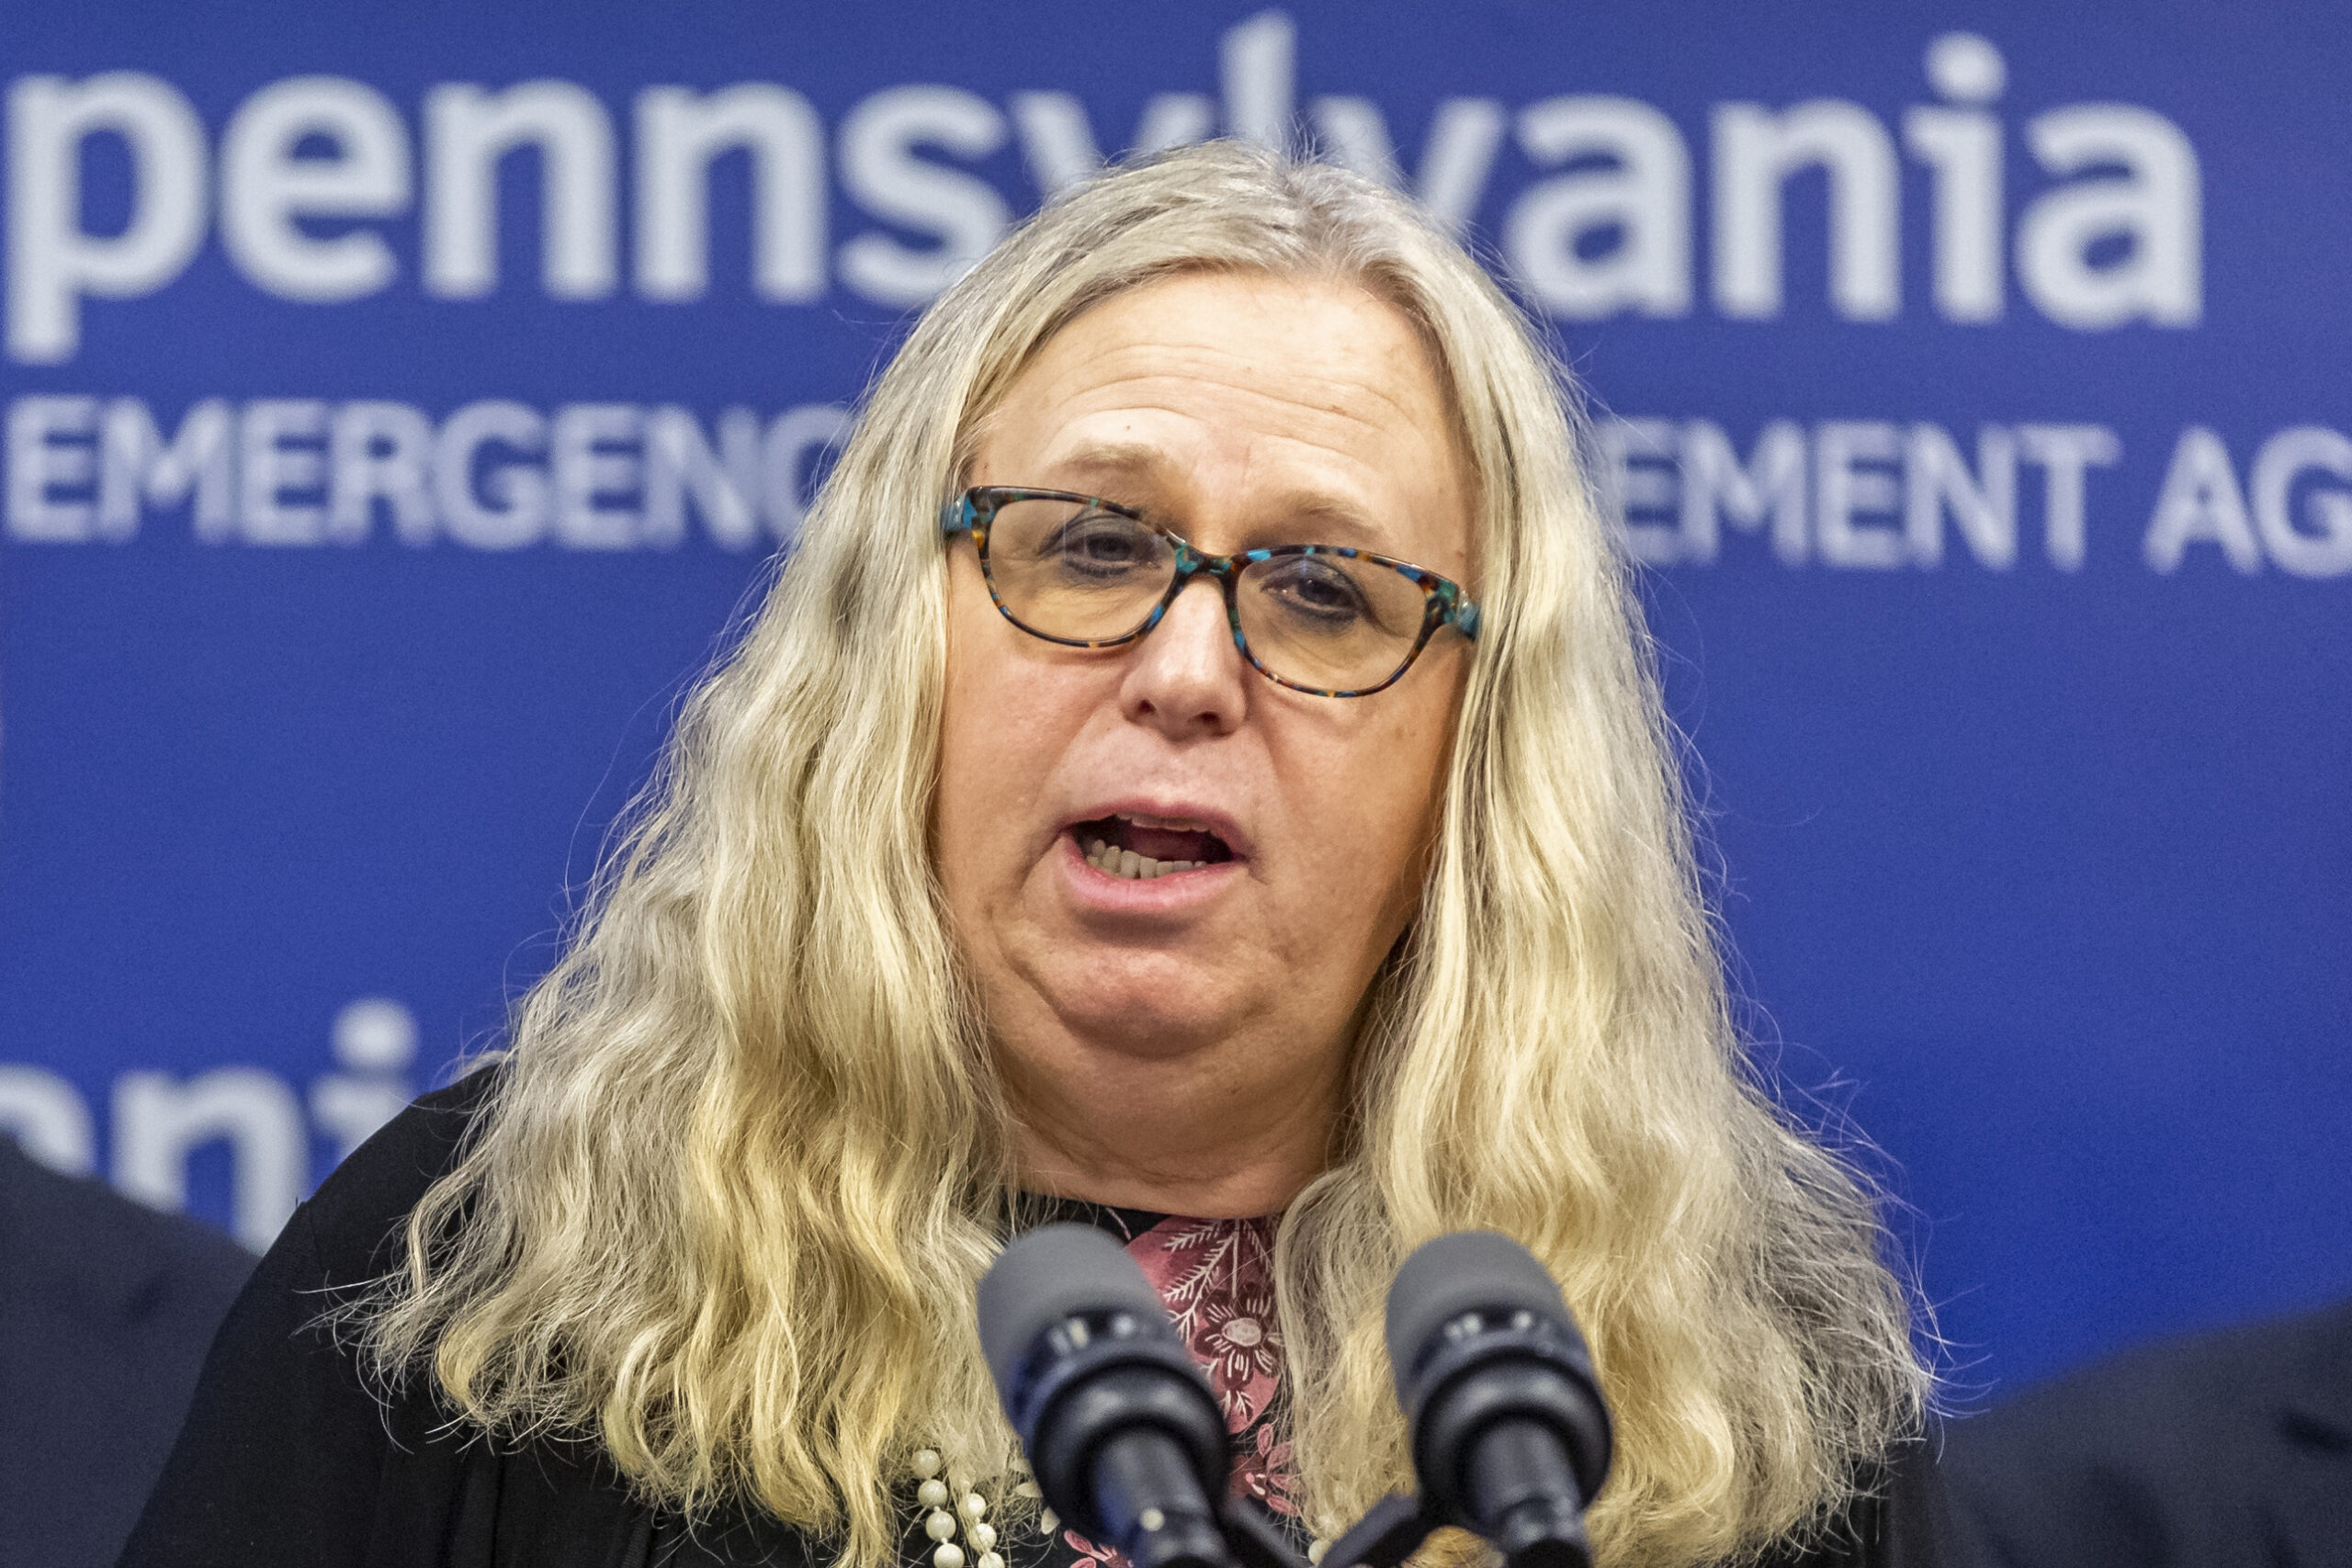 FILE - In this March 12, 2020, file photo, Pennsylvania Secretary of Health Rachel Levine provides an update on the coronavirus known as COVID-19 in Harrisburg, Pa. President-elect Joe Biden has tapped Levine to be his assistant secretary of health, leaving her poised to become the first openly transgender federal official to be confirmed by the U.S. Senate. (Joe Hermitt/The Patriot-News via AP, File)